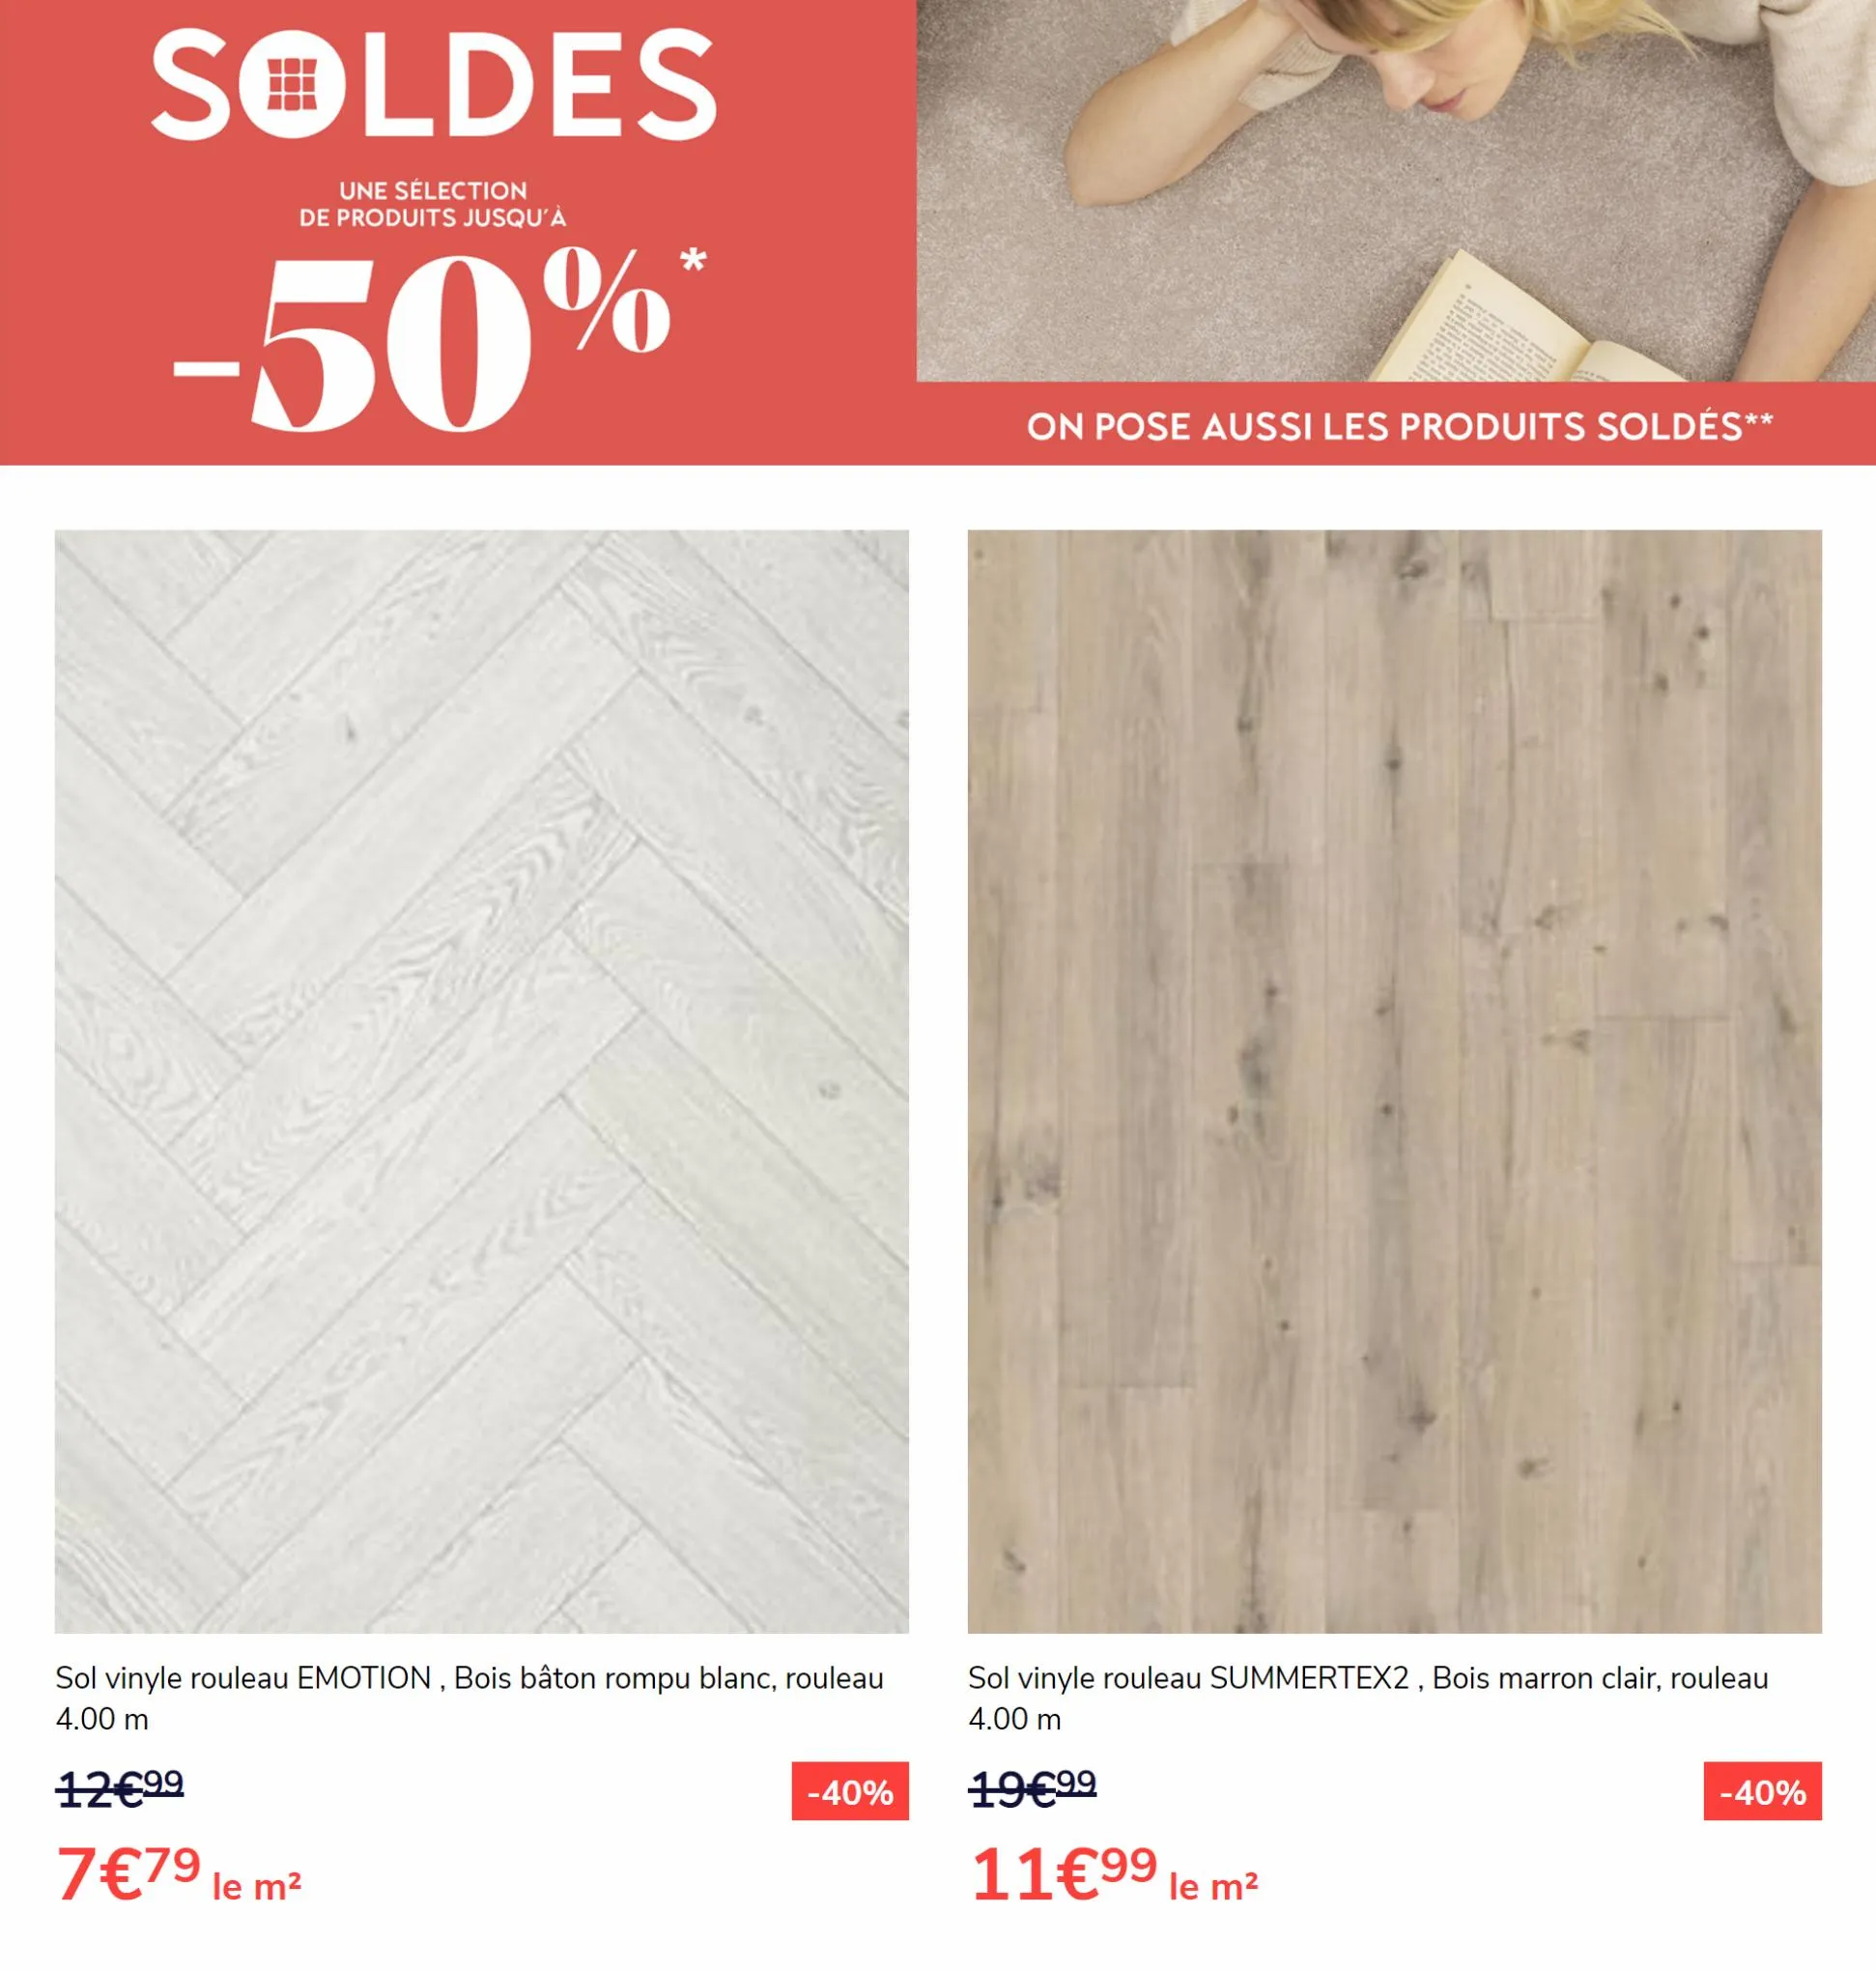 Catalogue SOLDES 50%, page 00004